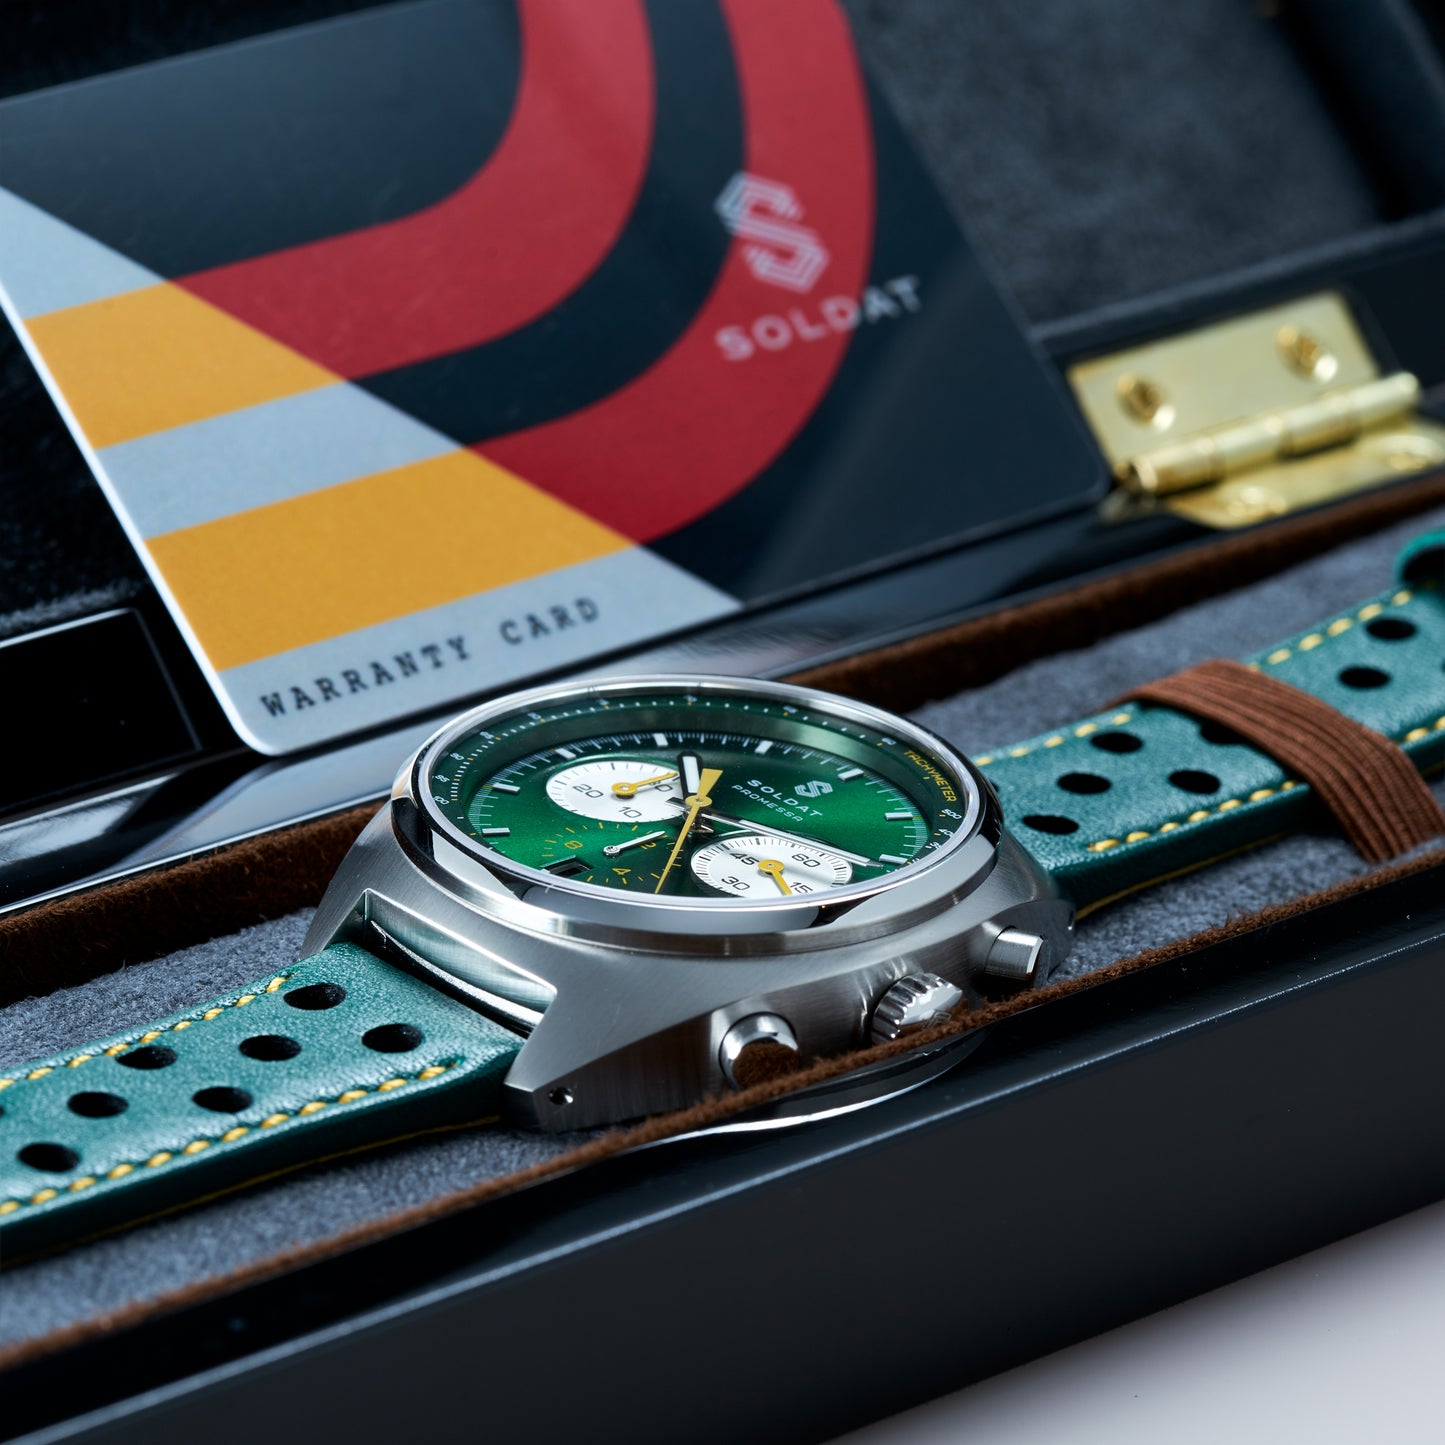 Soldat Automatic Chronograph 'Green Forty Nine'